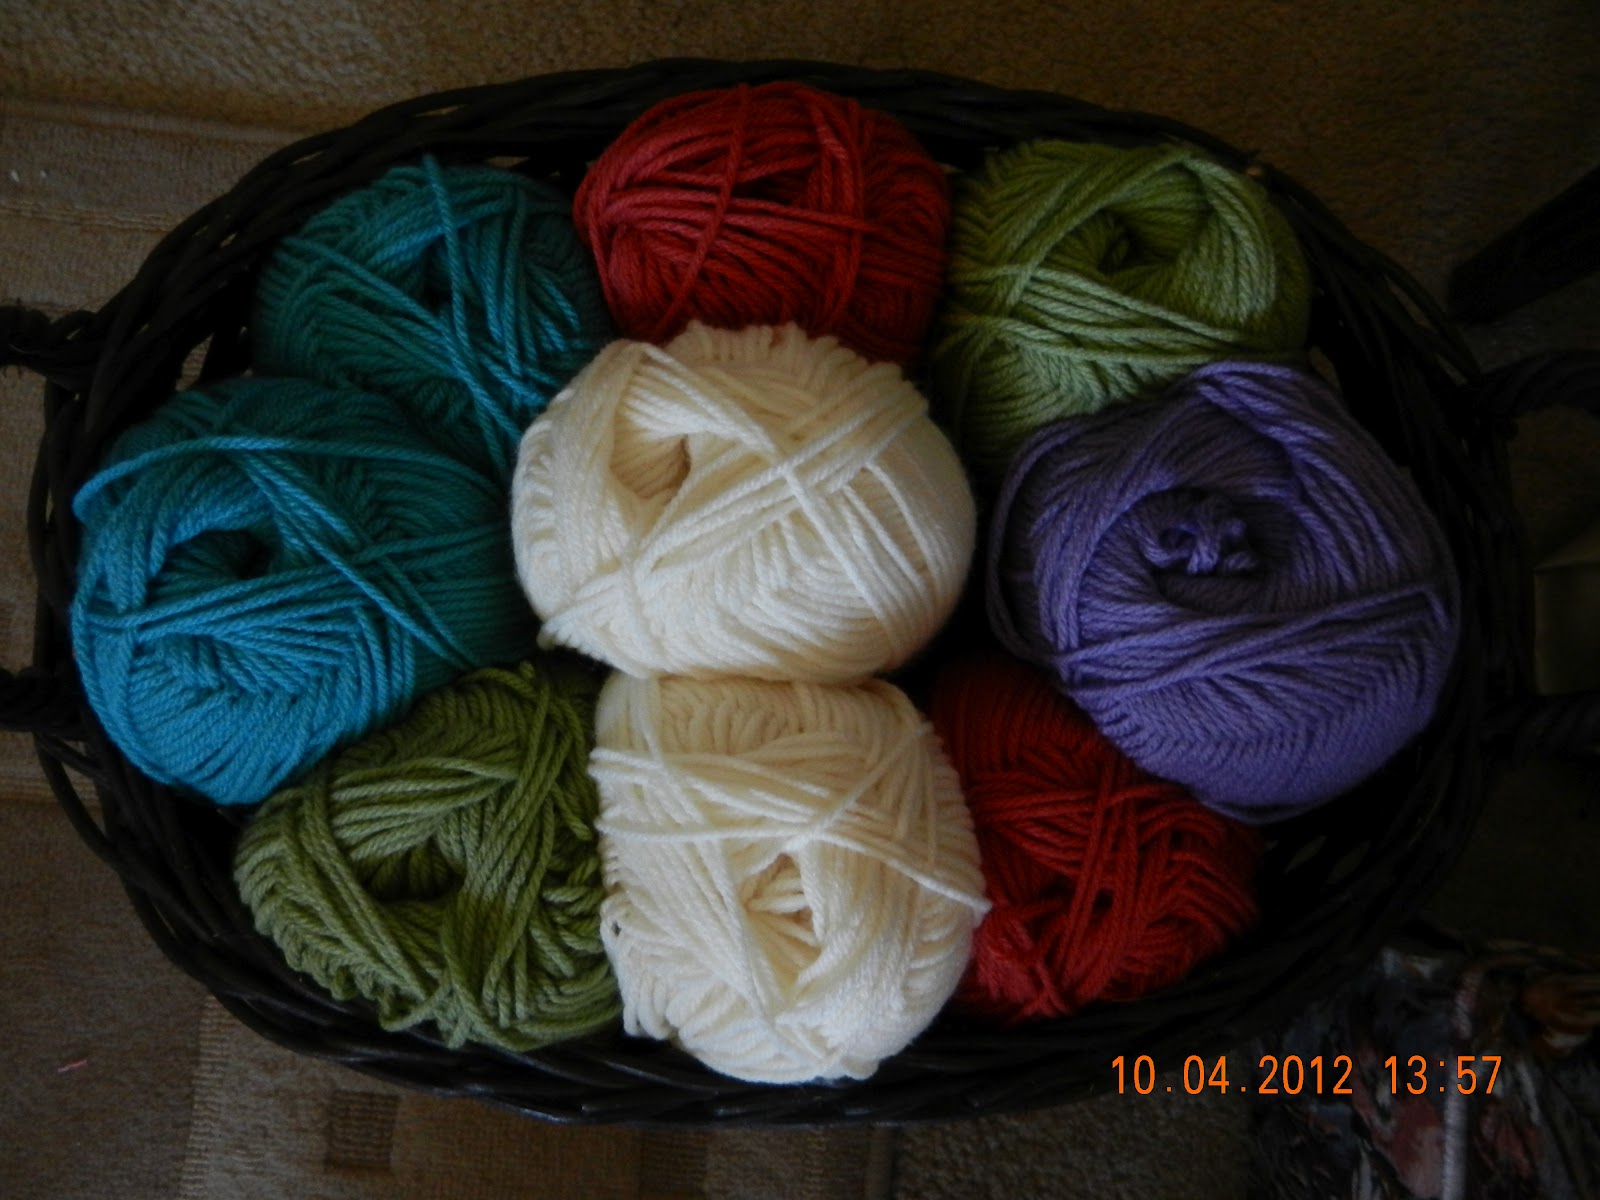 Michaels Stores - ALL yarn on sale! Every skein, every style! http